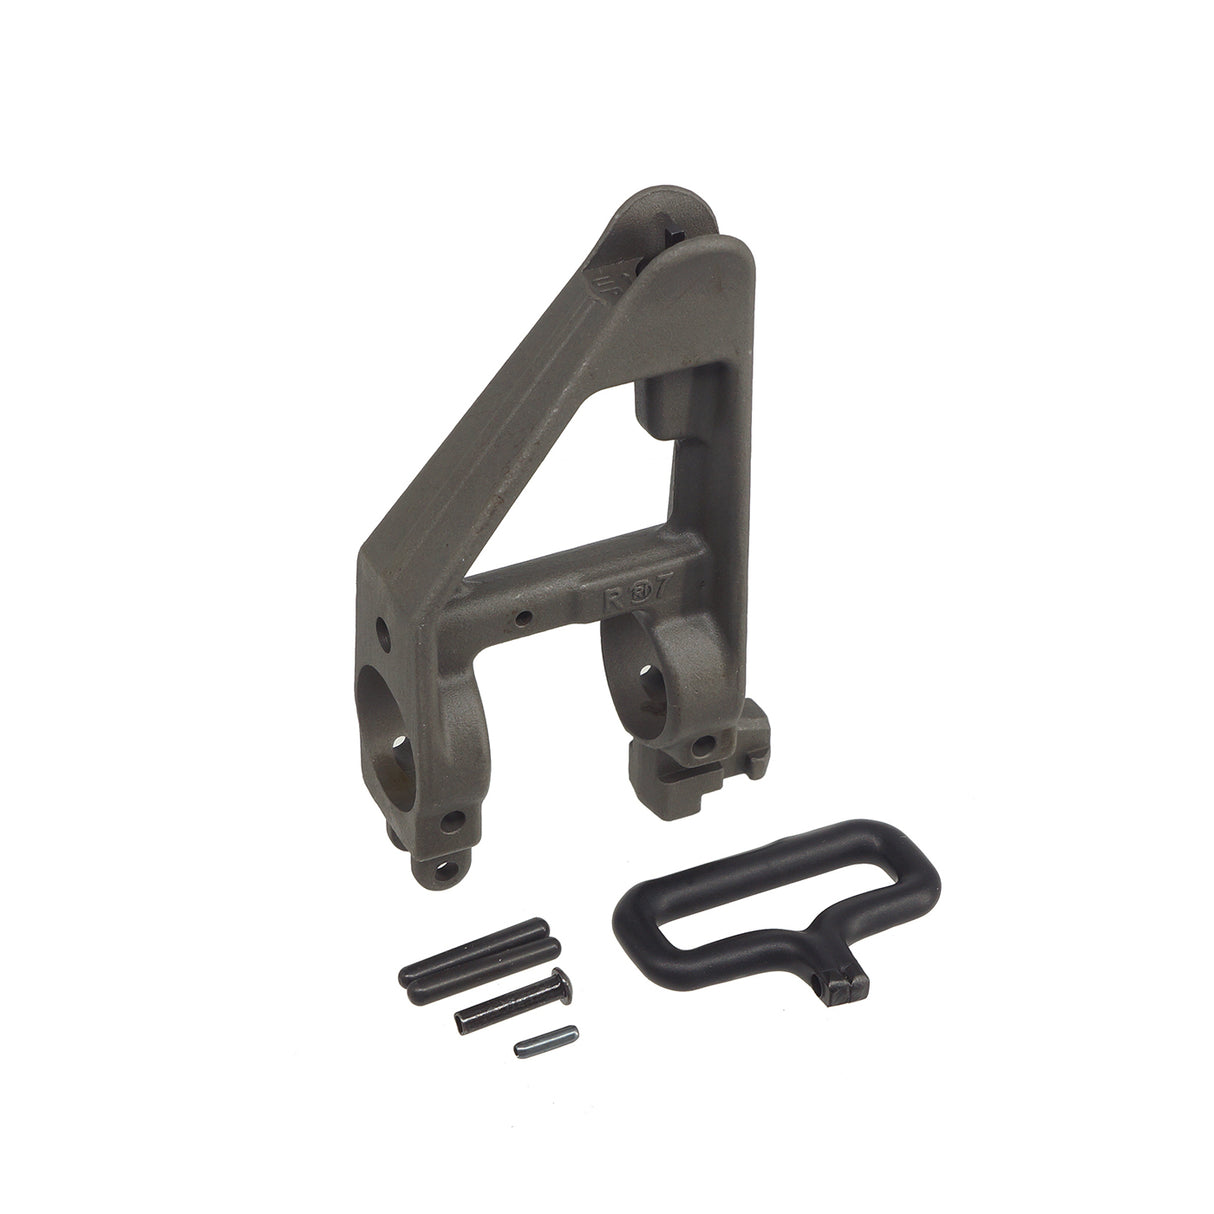 G&P M16A2 Steel Front Sight DX for AR / M4 Series ( GP929A )